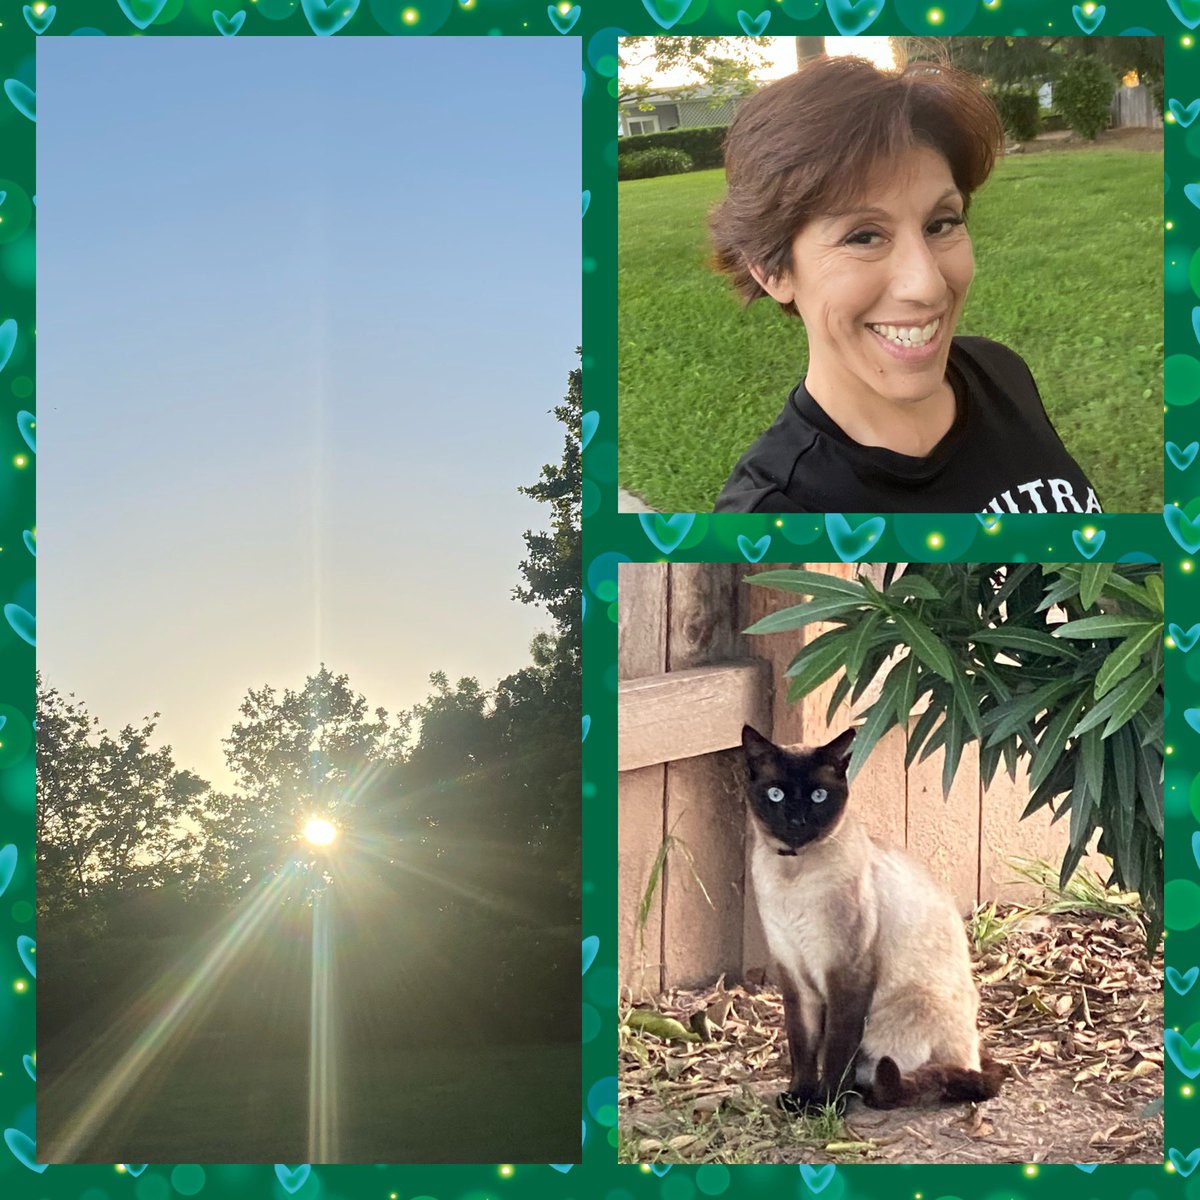 Last night I got in 6 miles.  Thrilled to see the mileage build. Another gorgeous sunset and the cat was back in the neighborhood!! #Fridaynight #littlethings #Slowandsteady #Nuunlife #SNB